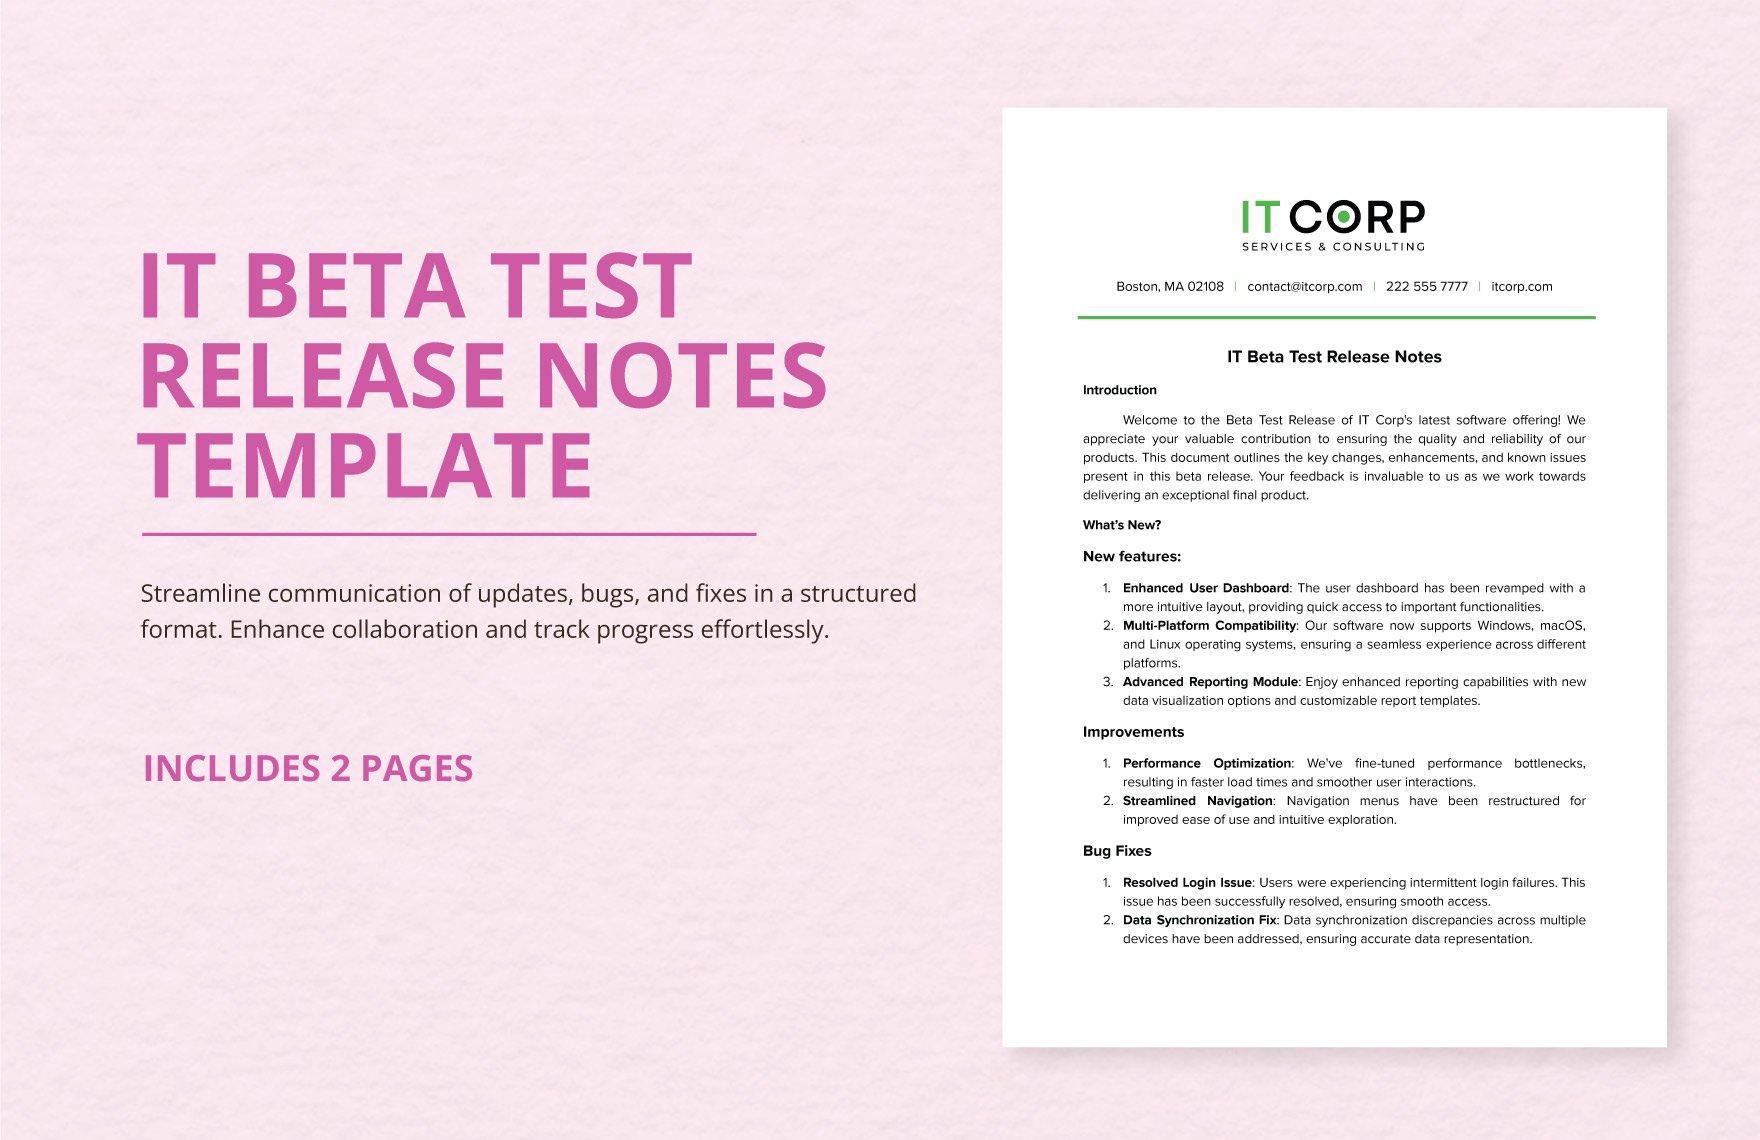 IT Beta Test Release Notes Template